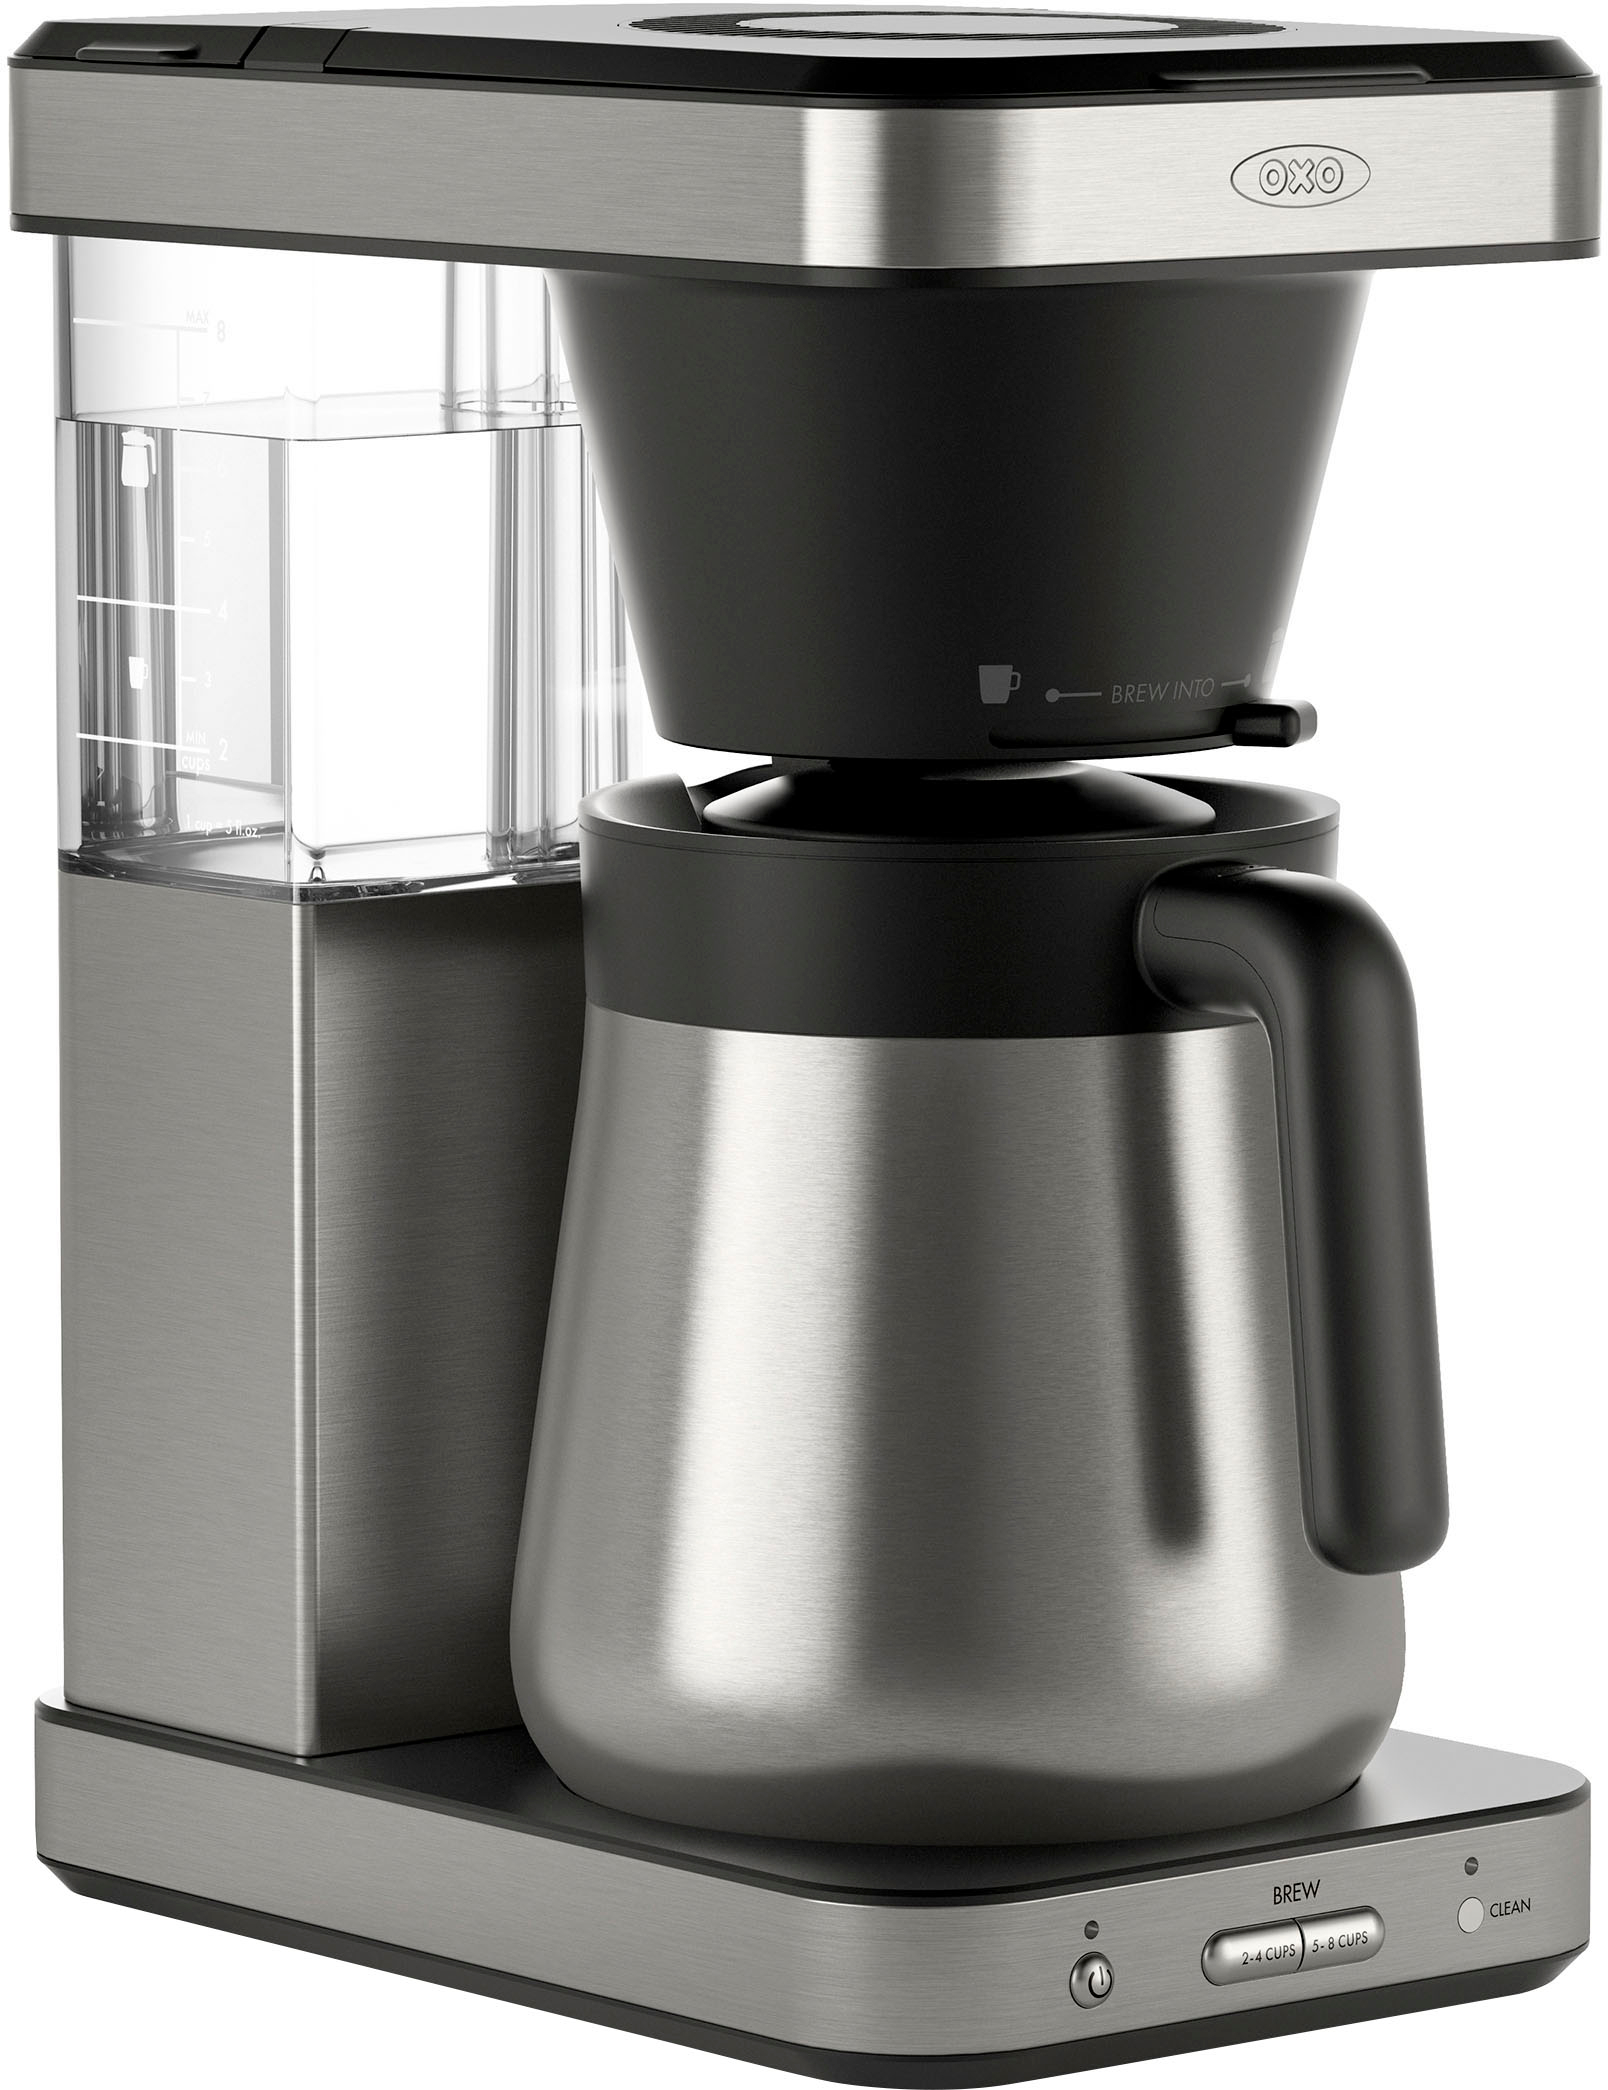 Brim 8-Cup French Press Coffee Maker Stainless Steel 50023 - Best Buy